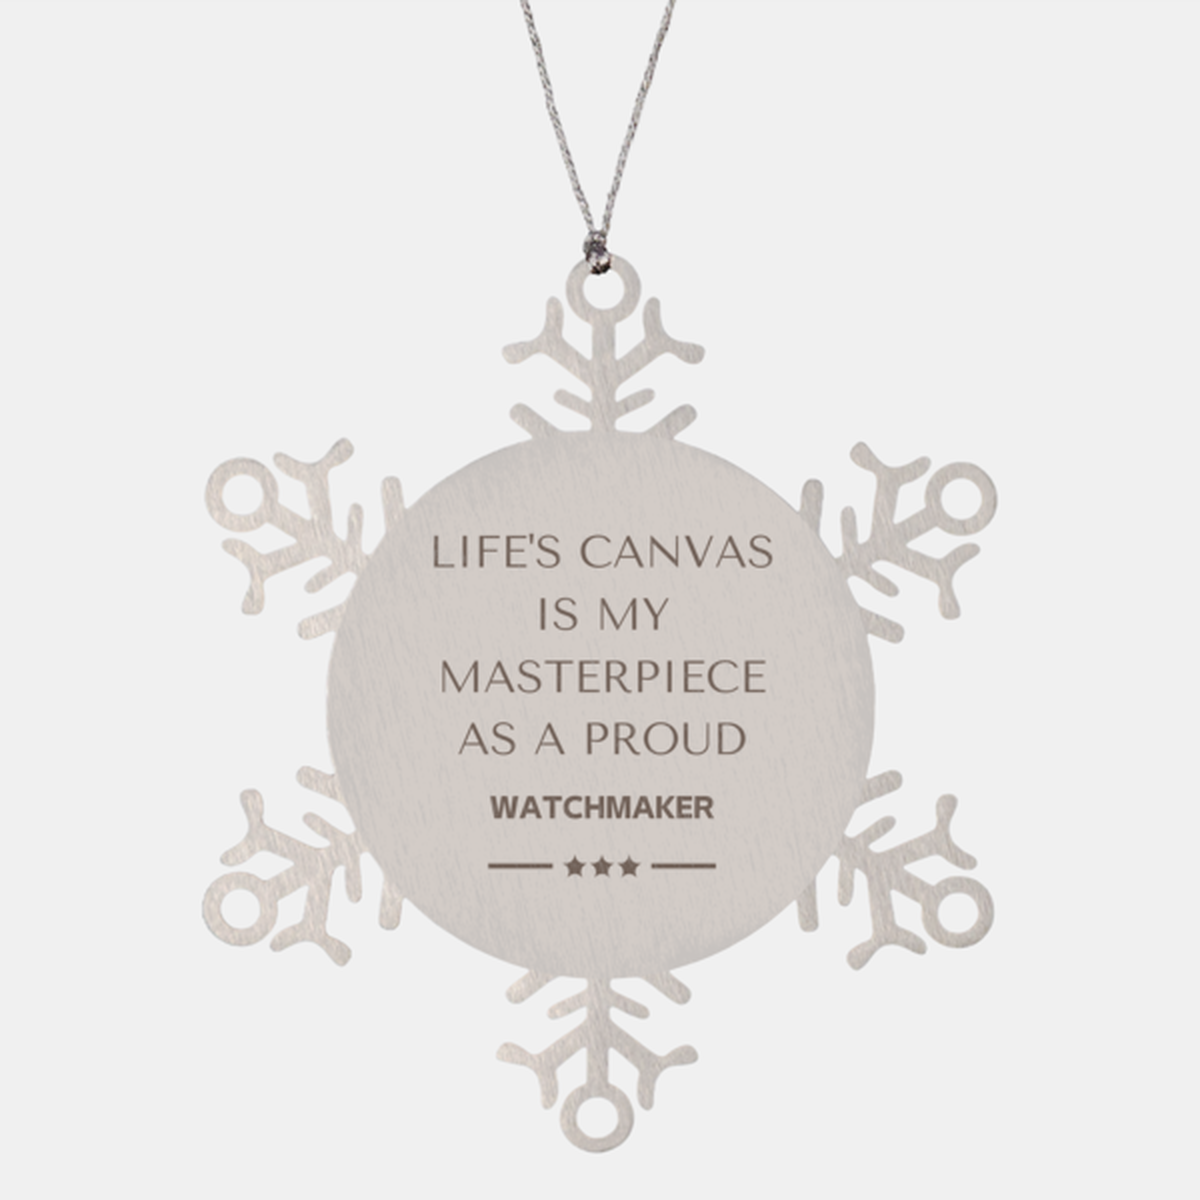 Proud Watchmaker Gifts, Life's canvas is my masterpiece, Epic Birthday Christmas Unique Snowflake Ornament For Watchmaker, Coworkers, Men, Women, Friends